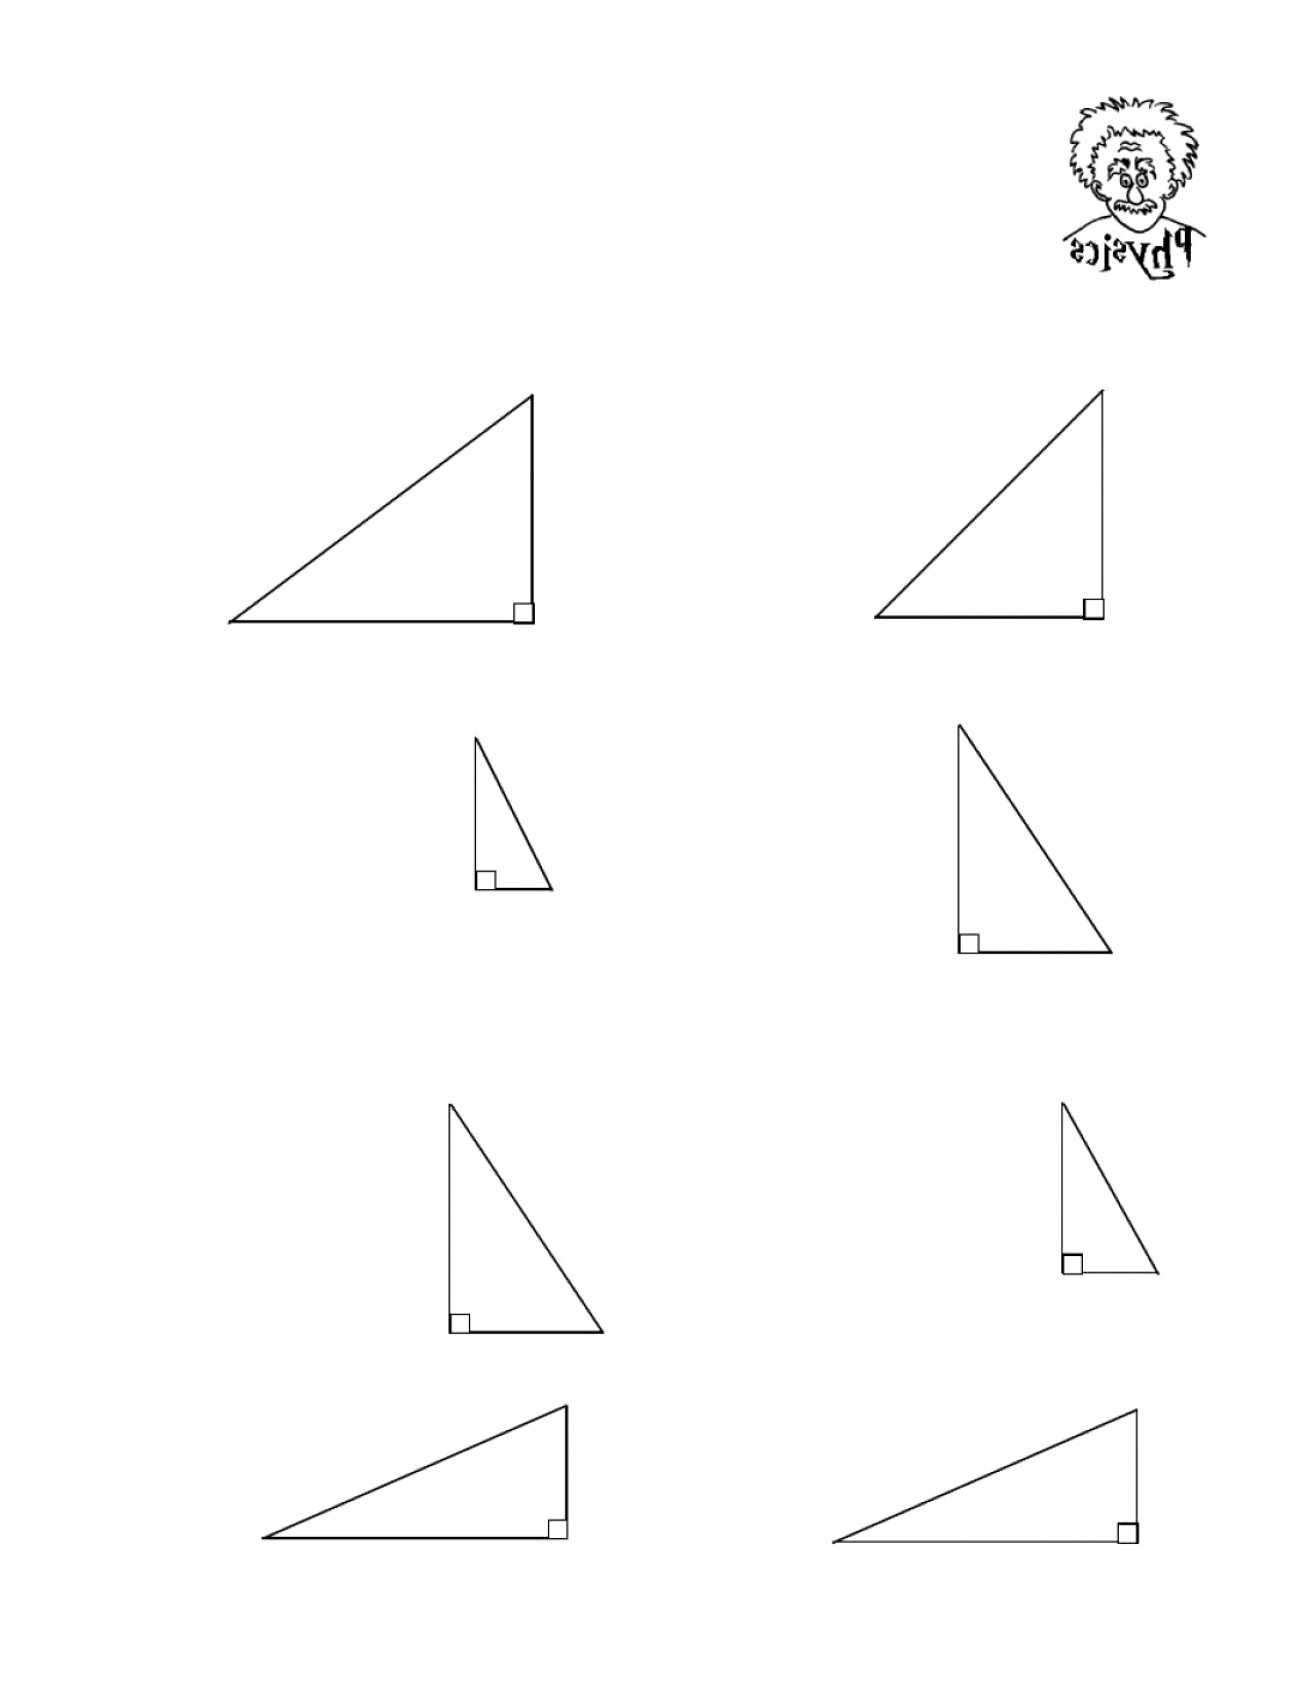 Geometry Parallelogram Worksheet Answers and Vectors Parallelogram Method Worksheet